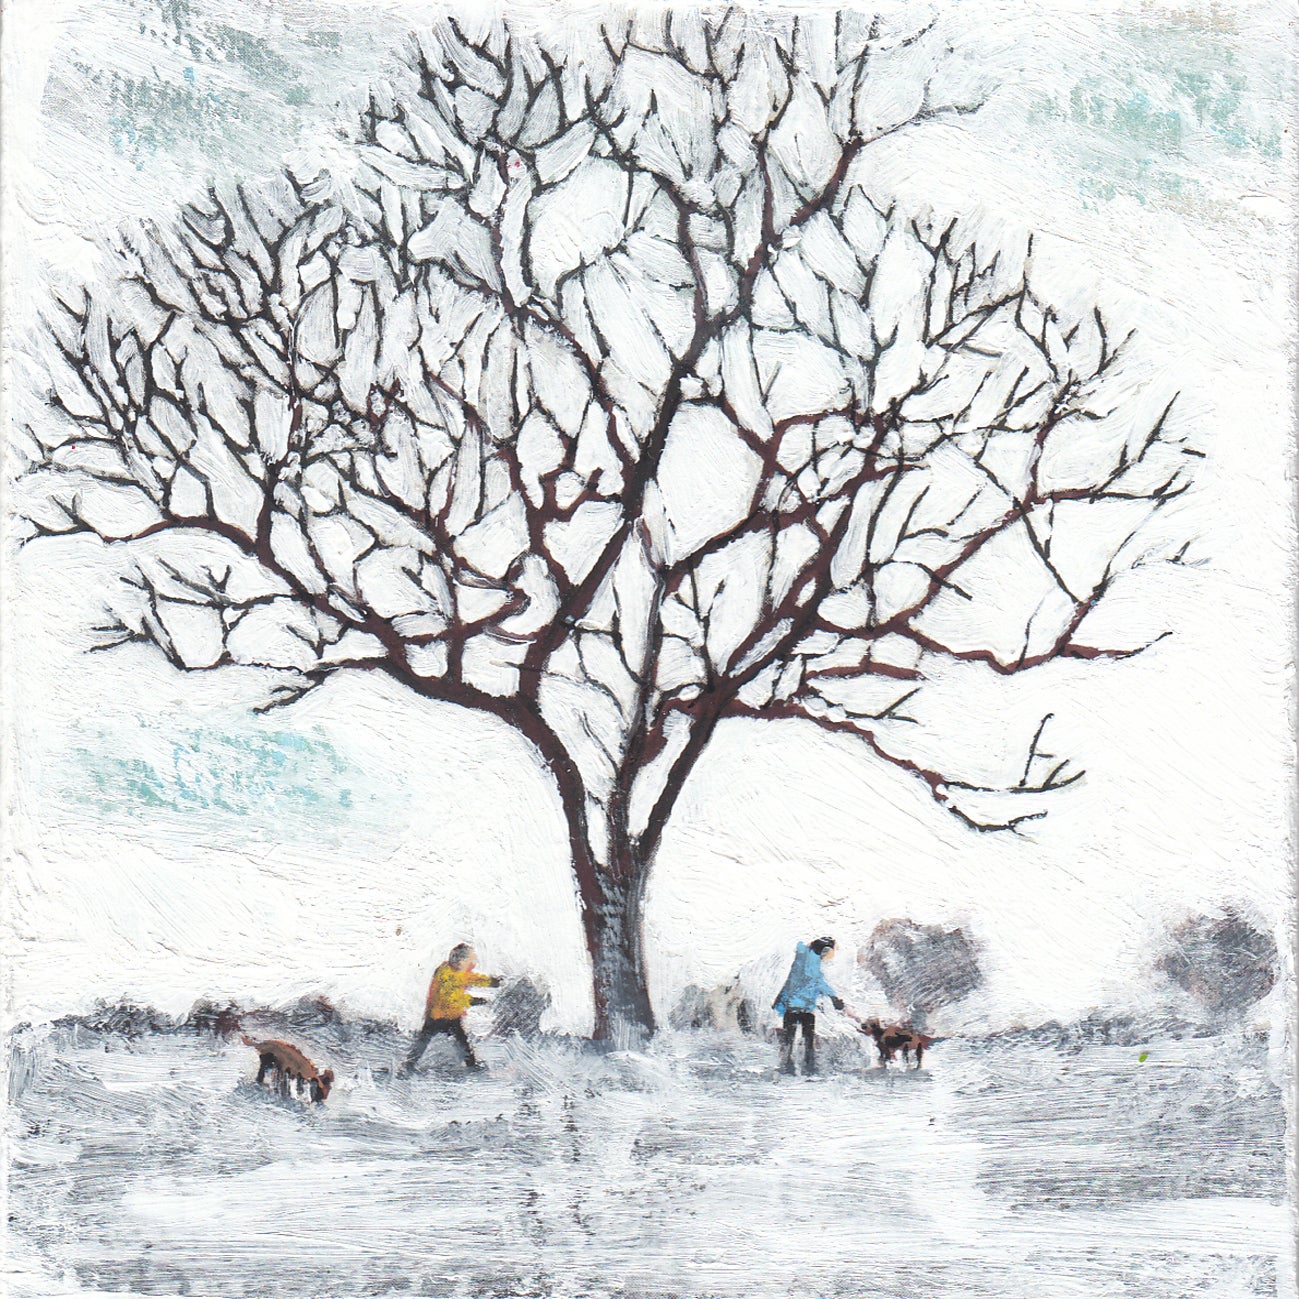 Rime III by Henry Walsh [2021]

Rime III by Henry Walsh is an original acrylic painting on a wooden board that features people at leisure on a wintry walk. Henry Walsh’s work begin with snapshots of busy life and by a process of elimination, he